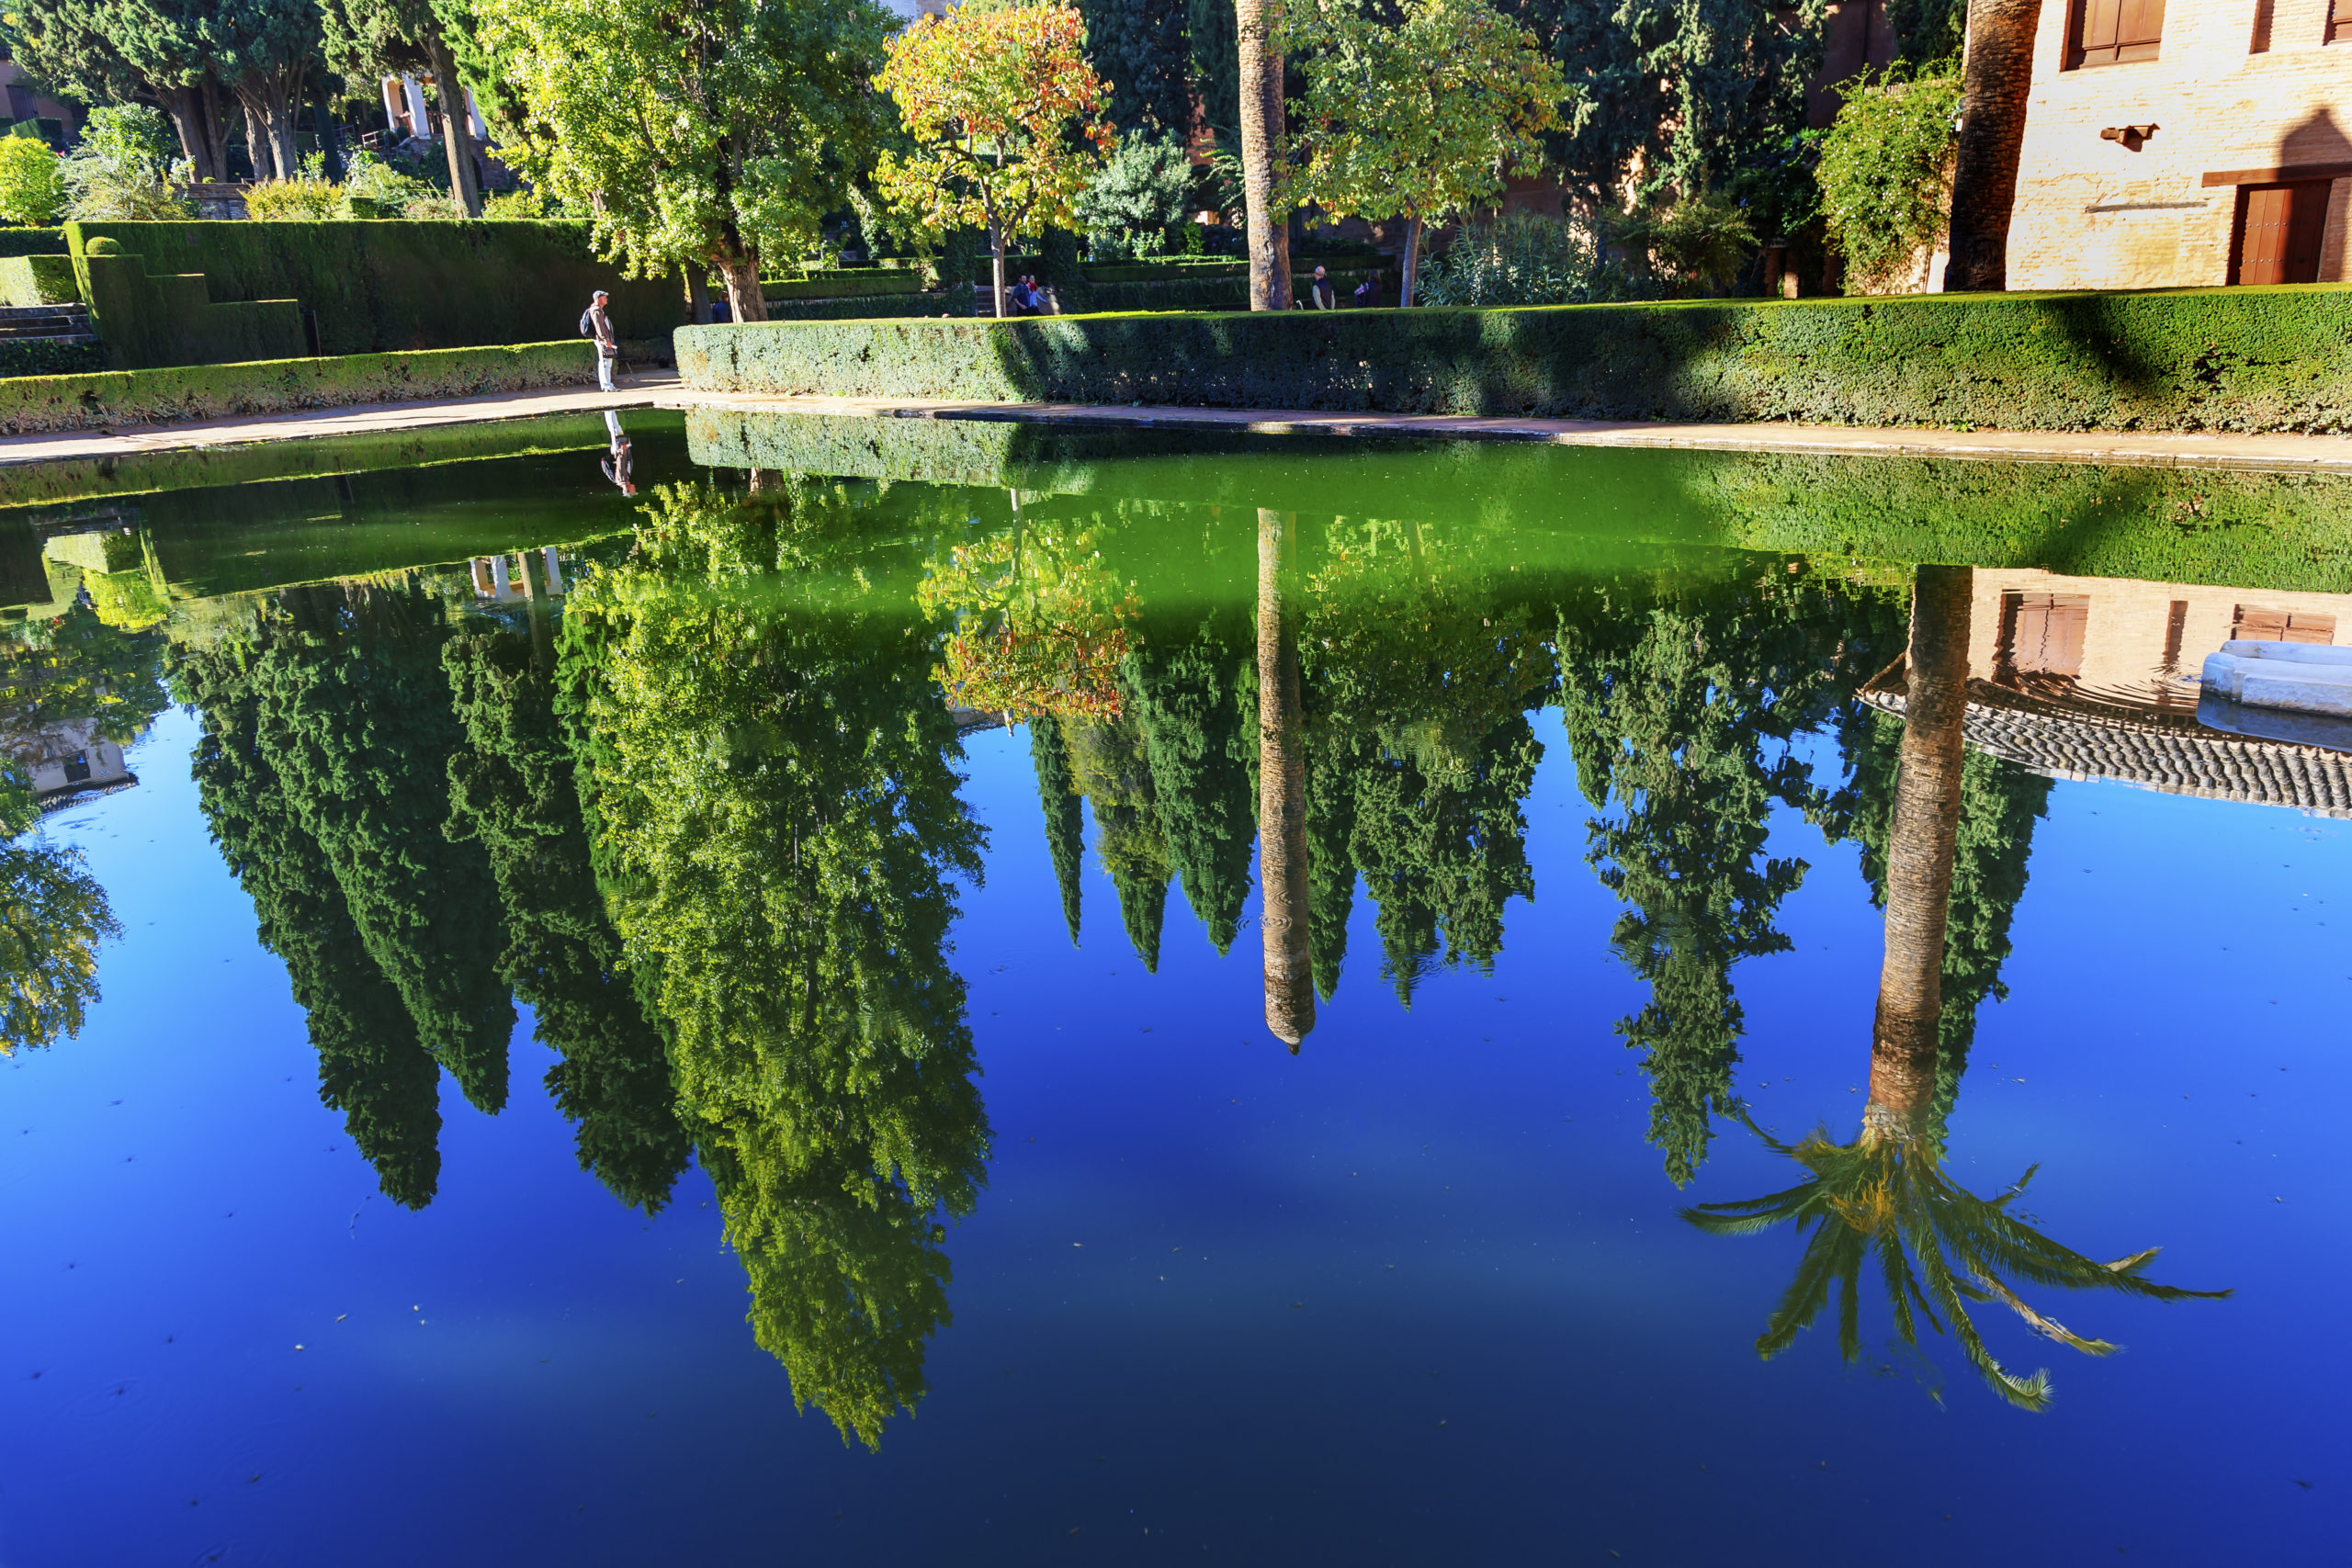 A pool reflecting the surrounding trees in its clear, still waters, creating a serene and picturesque scene of nature's beauty mirrored on the water's surface.